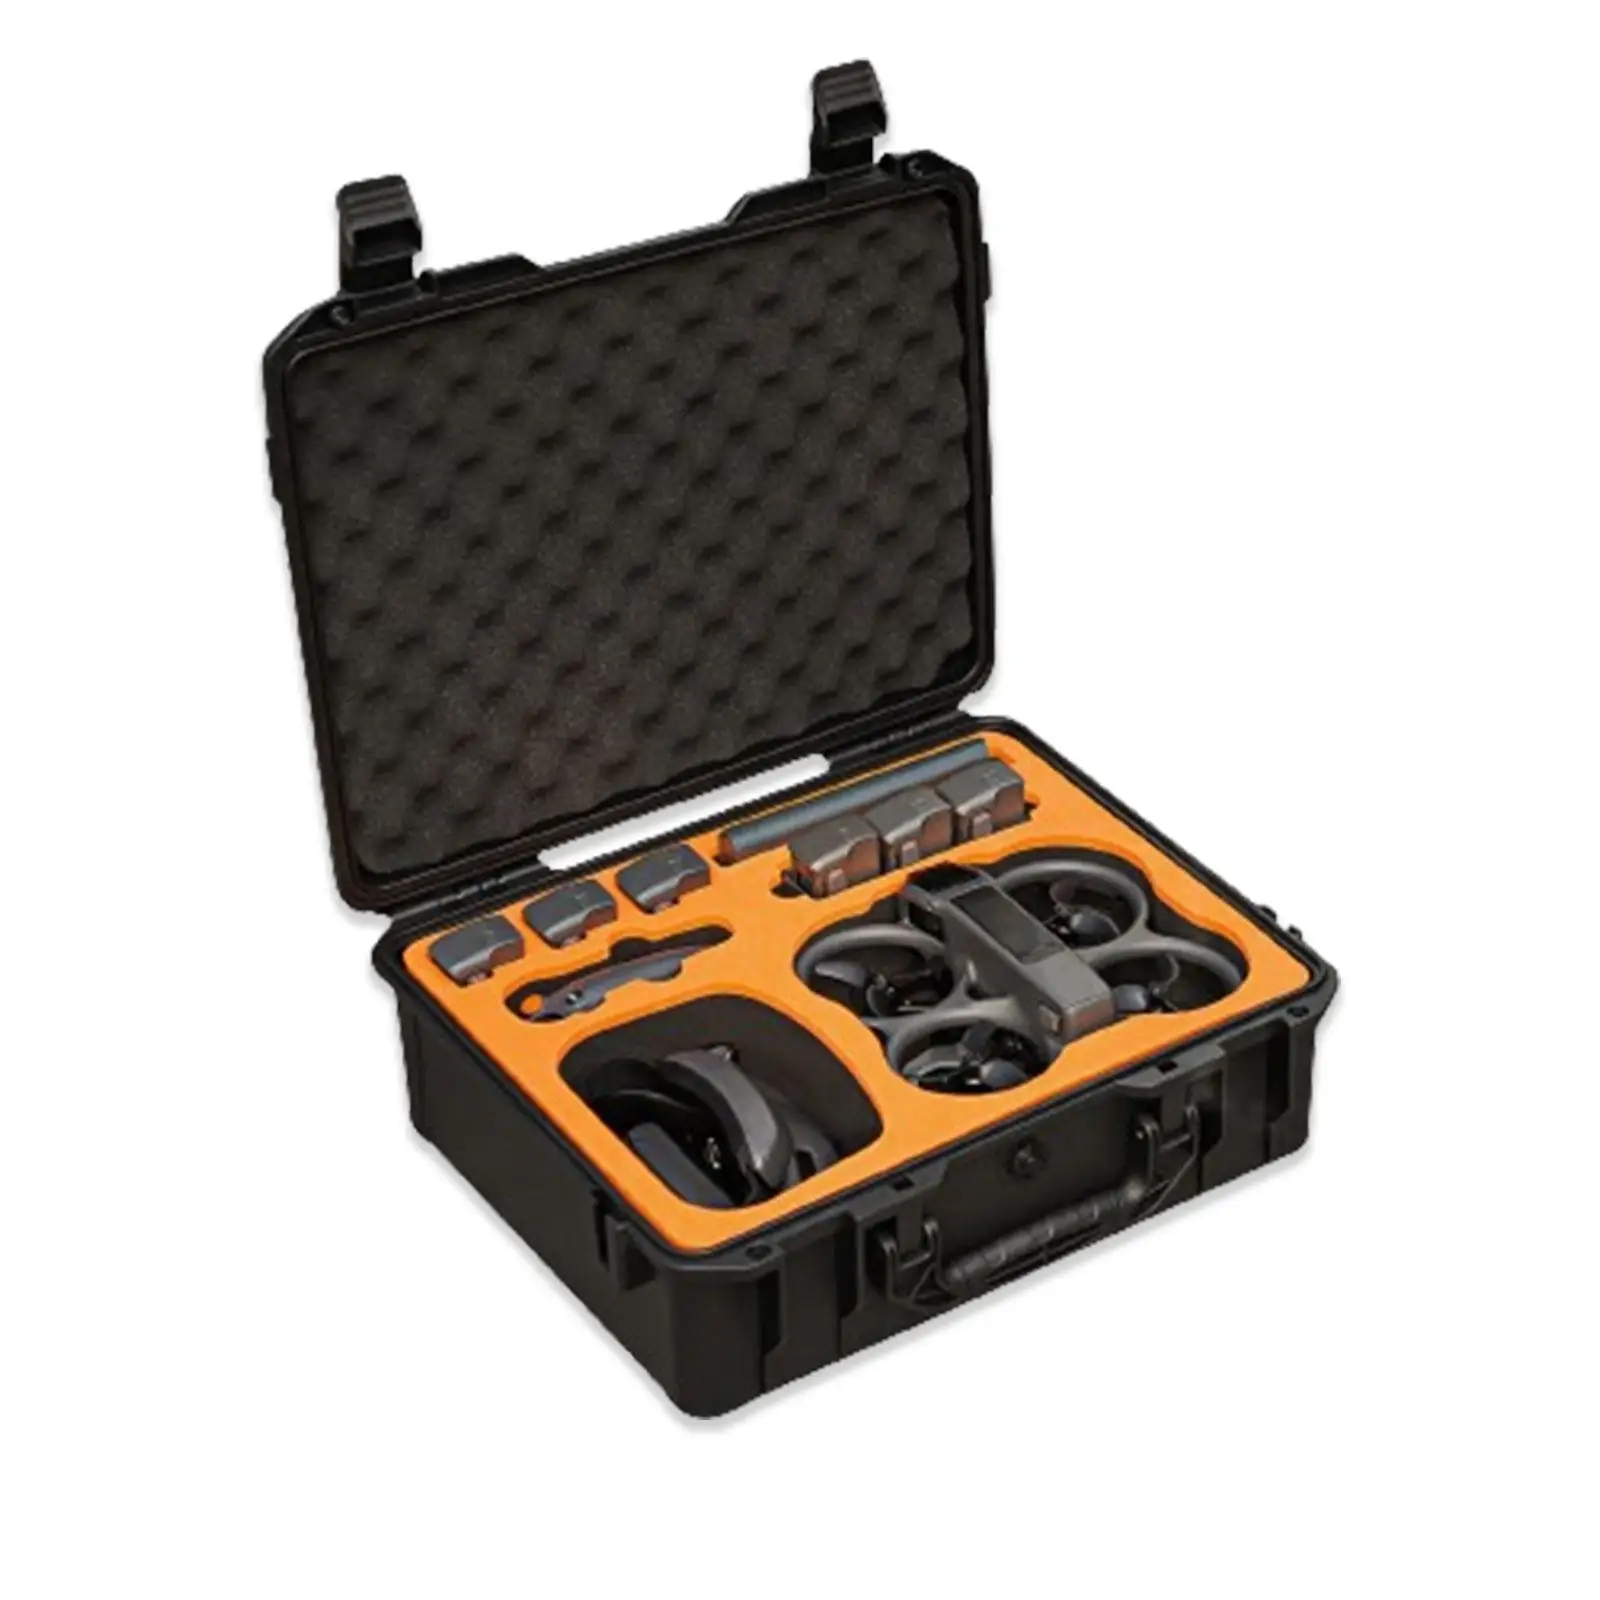 

Hard Carrying Case Waterproof Hard Case Outdoor Storage Bag Explosion Proof Box for Quadcopter RC Aircraft Helicopter Accessory